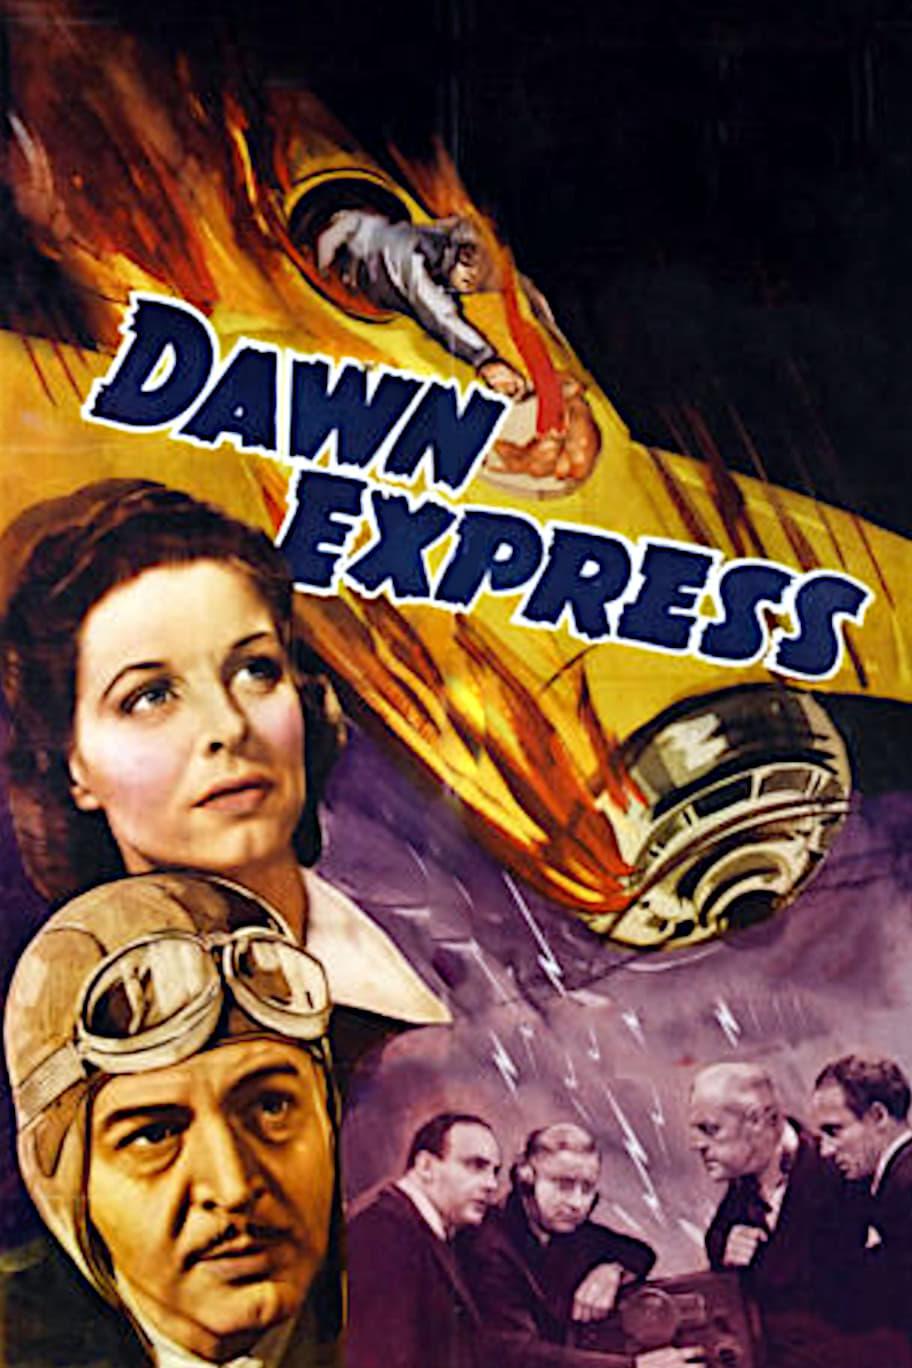 The Dawn Express poster